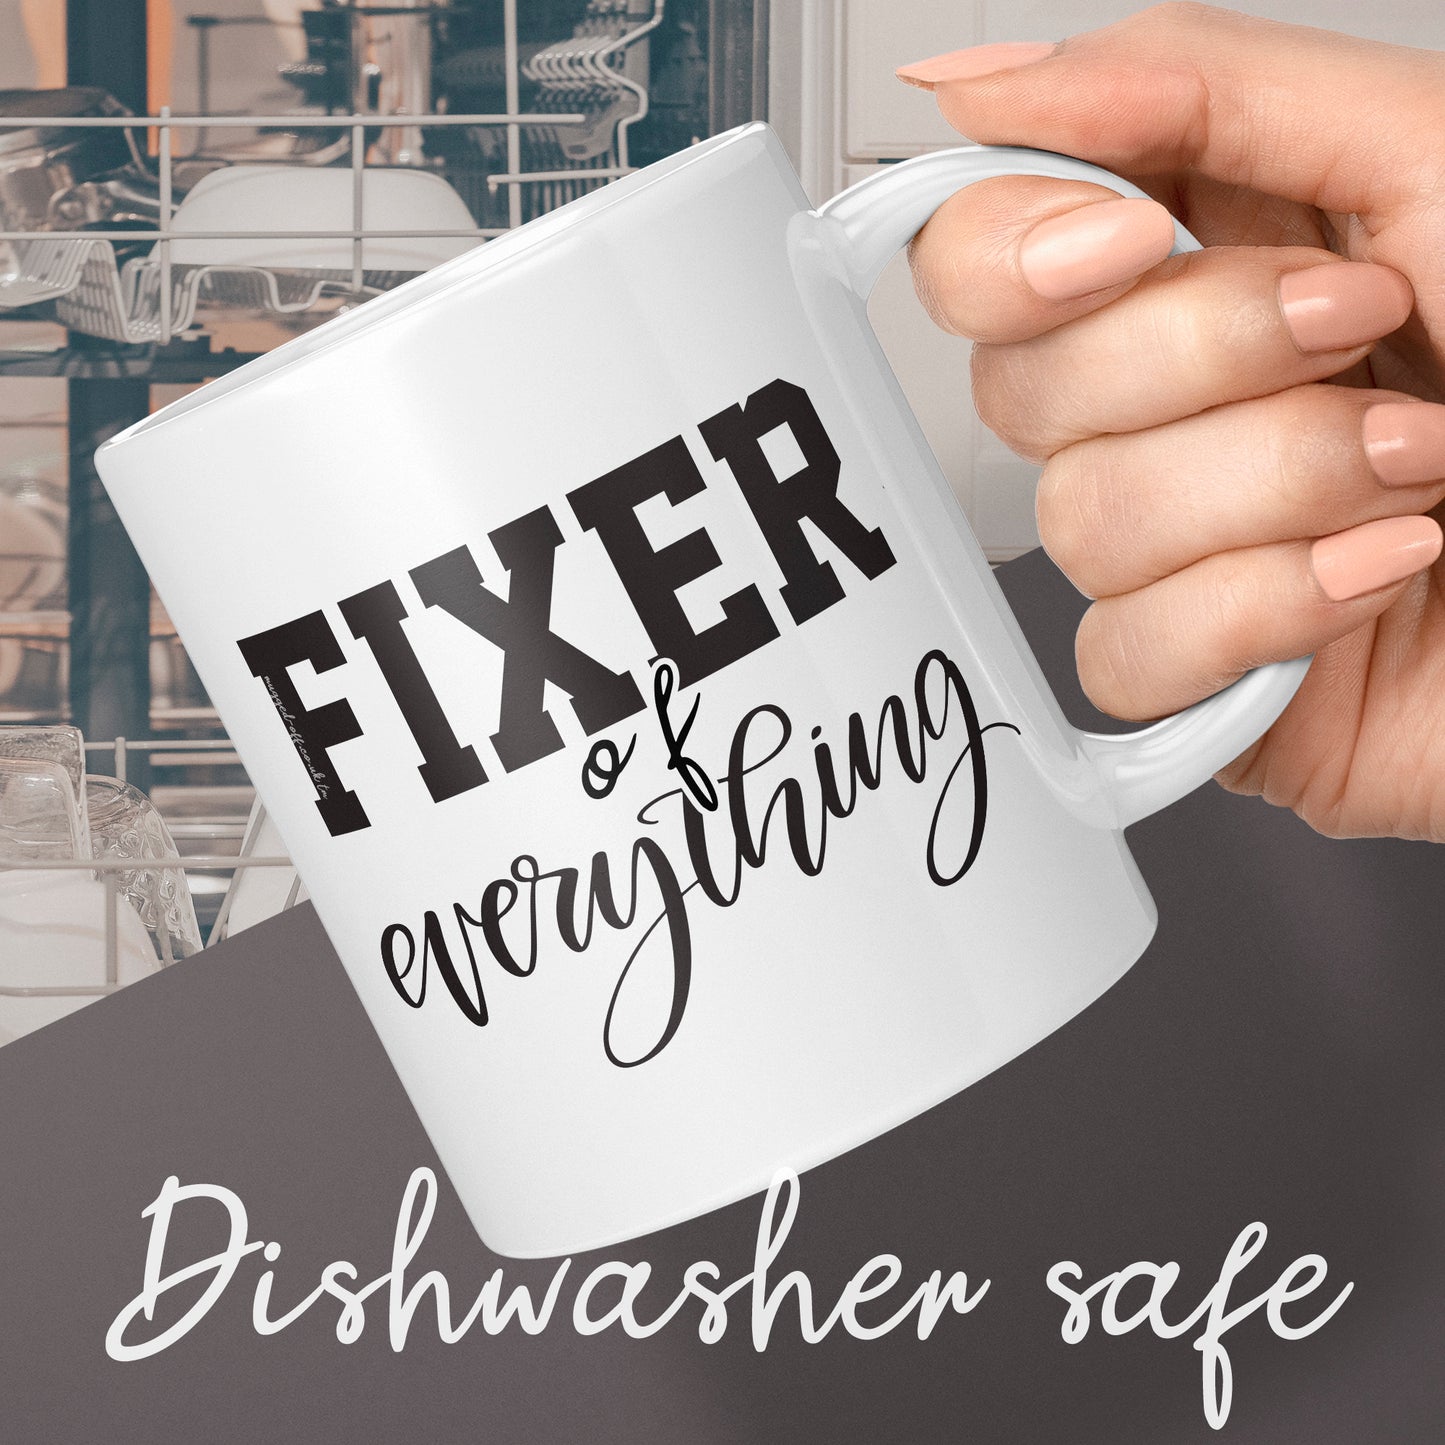 Mum Gift Dad Gift Fixer Of Everything Mug Funny Secret Santa Gifts For Work Colleague & Office Boss Birthday Christmas Leaving Gifts Work Colleague Husband Wife Girlfriend Boyfriend Gift For Him Or Her Unique Gift For Dad Grandad Mum